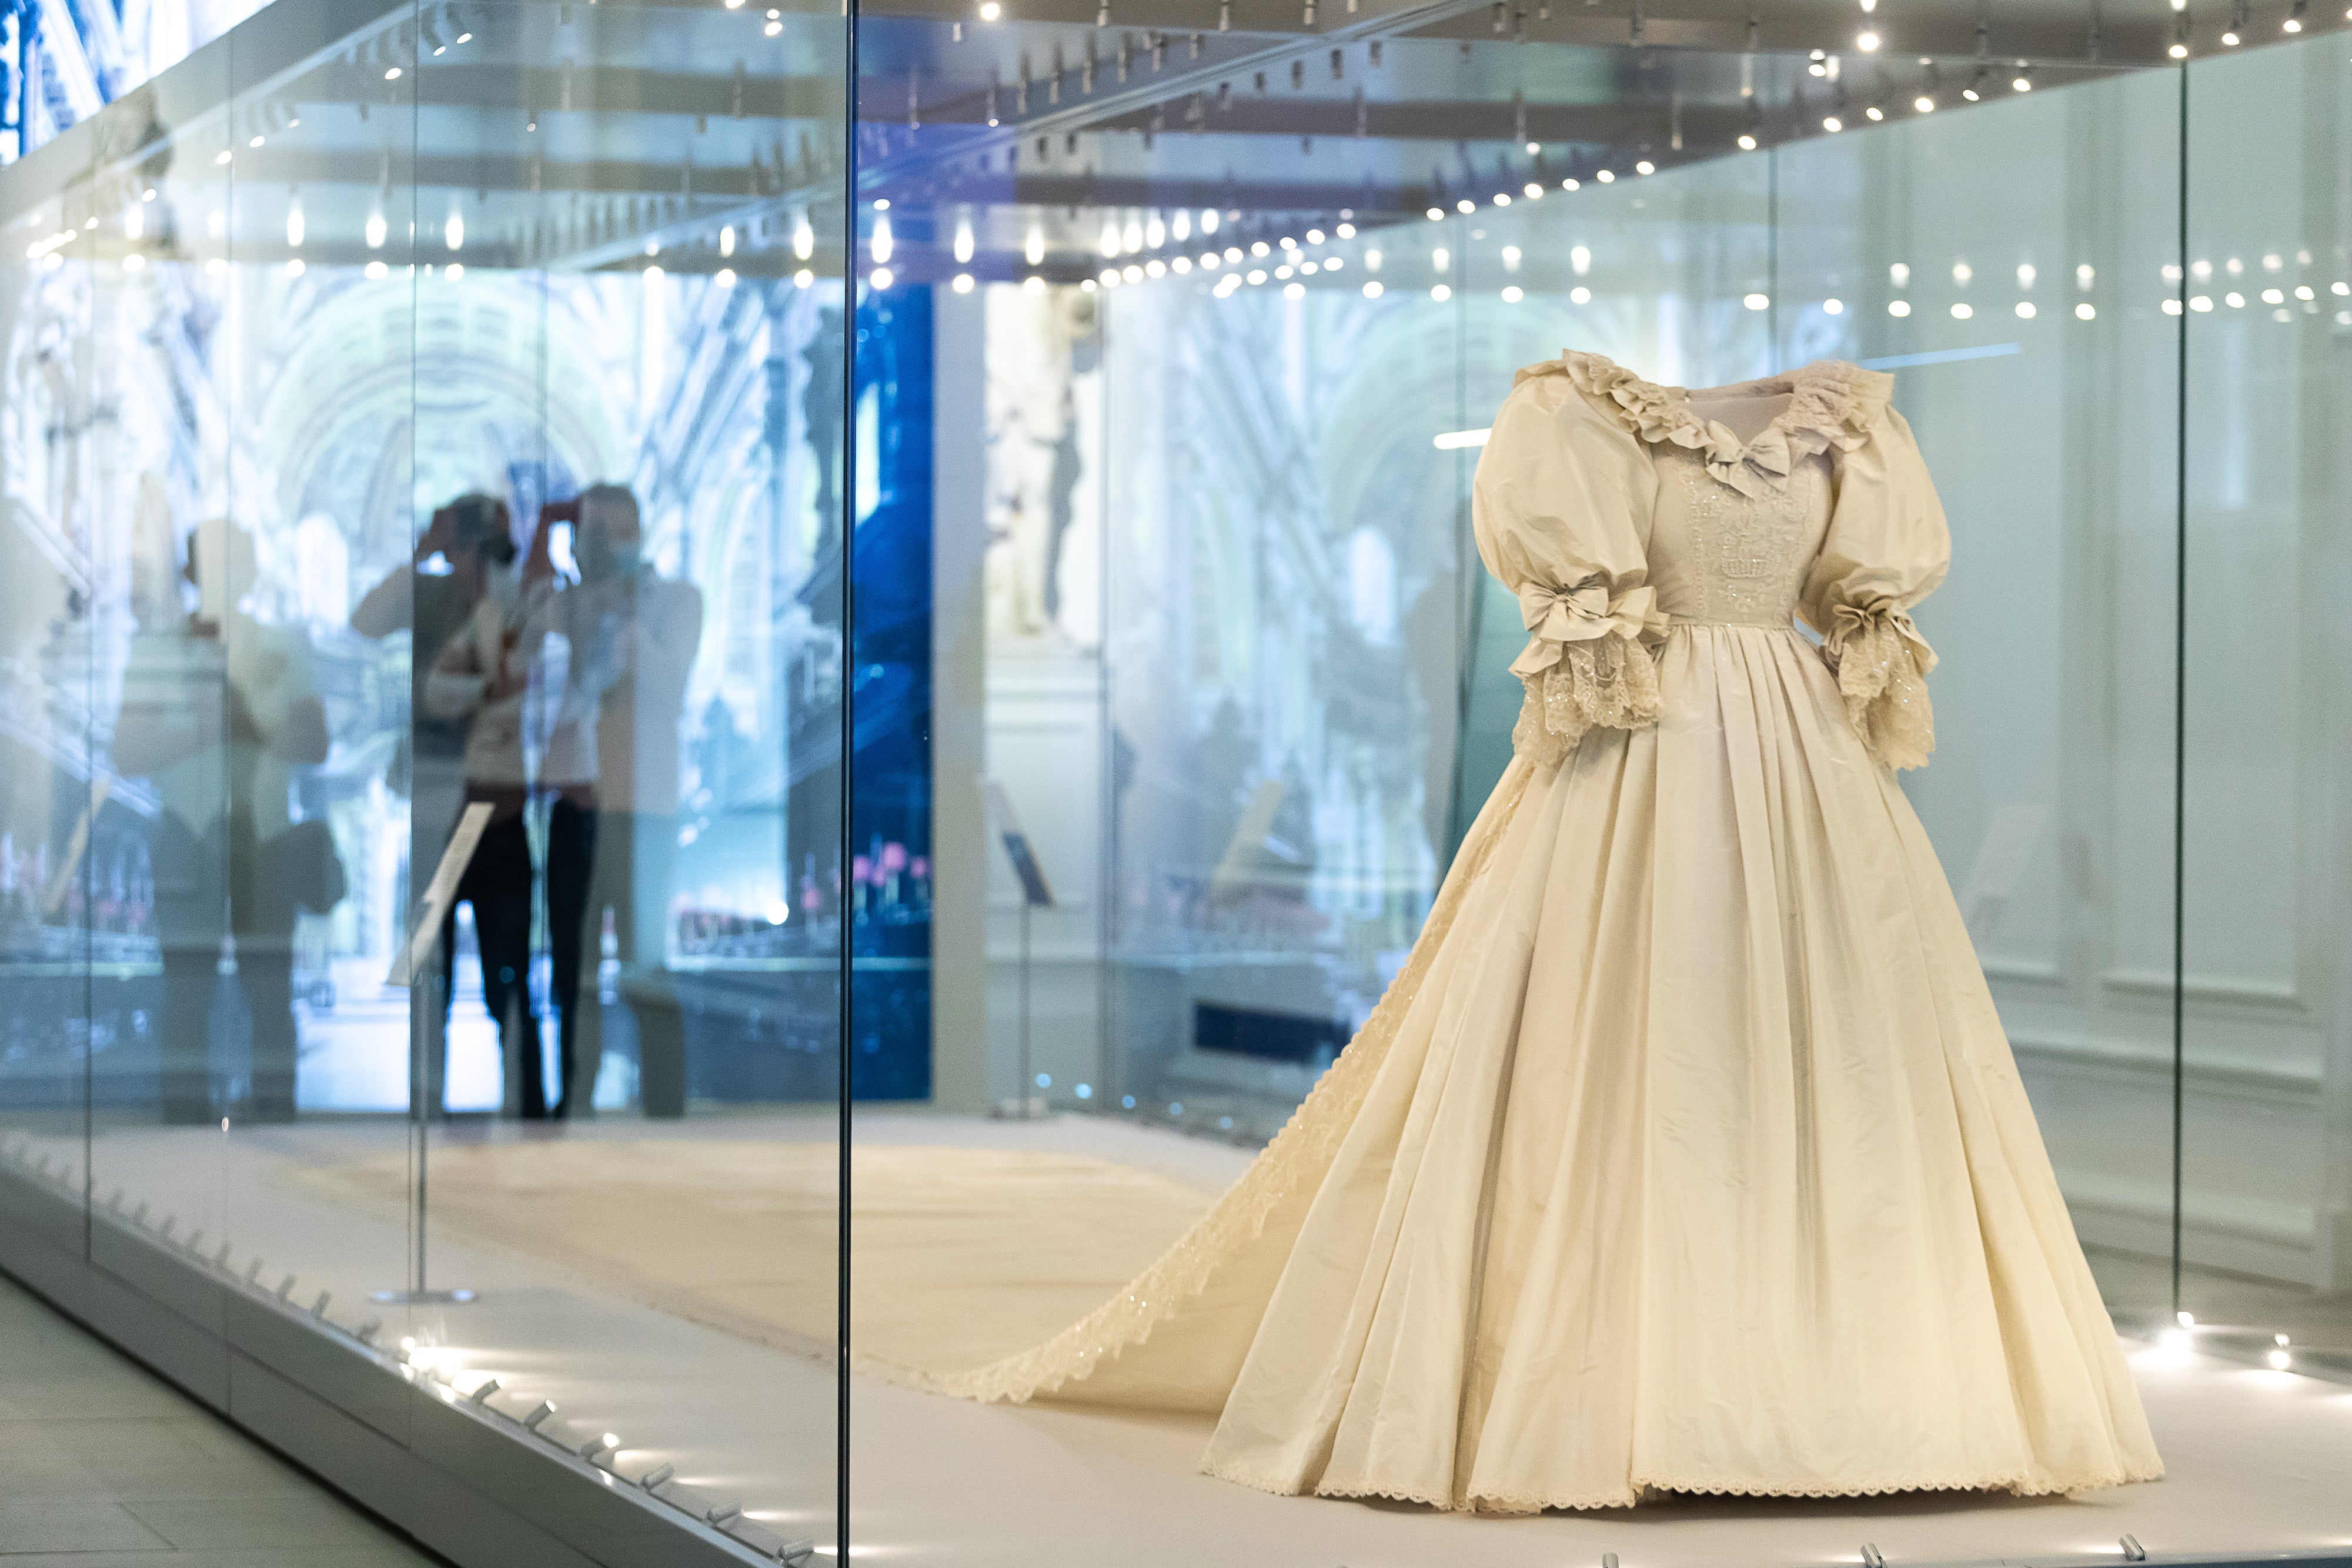 The ‘Royal Style in the Making’ exhibition will display Diana’s iconic wedding dress at Kensington Palace for the first time in 25 years